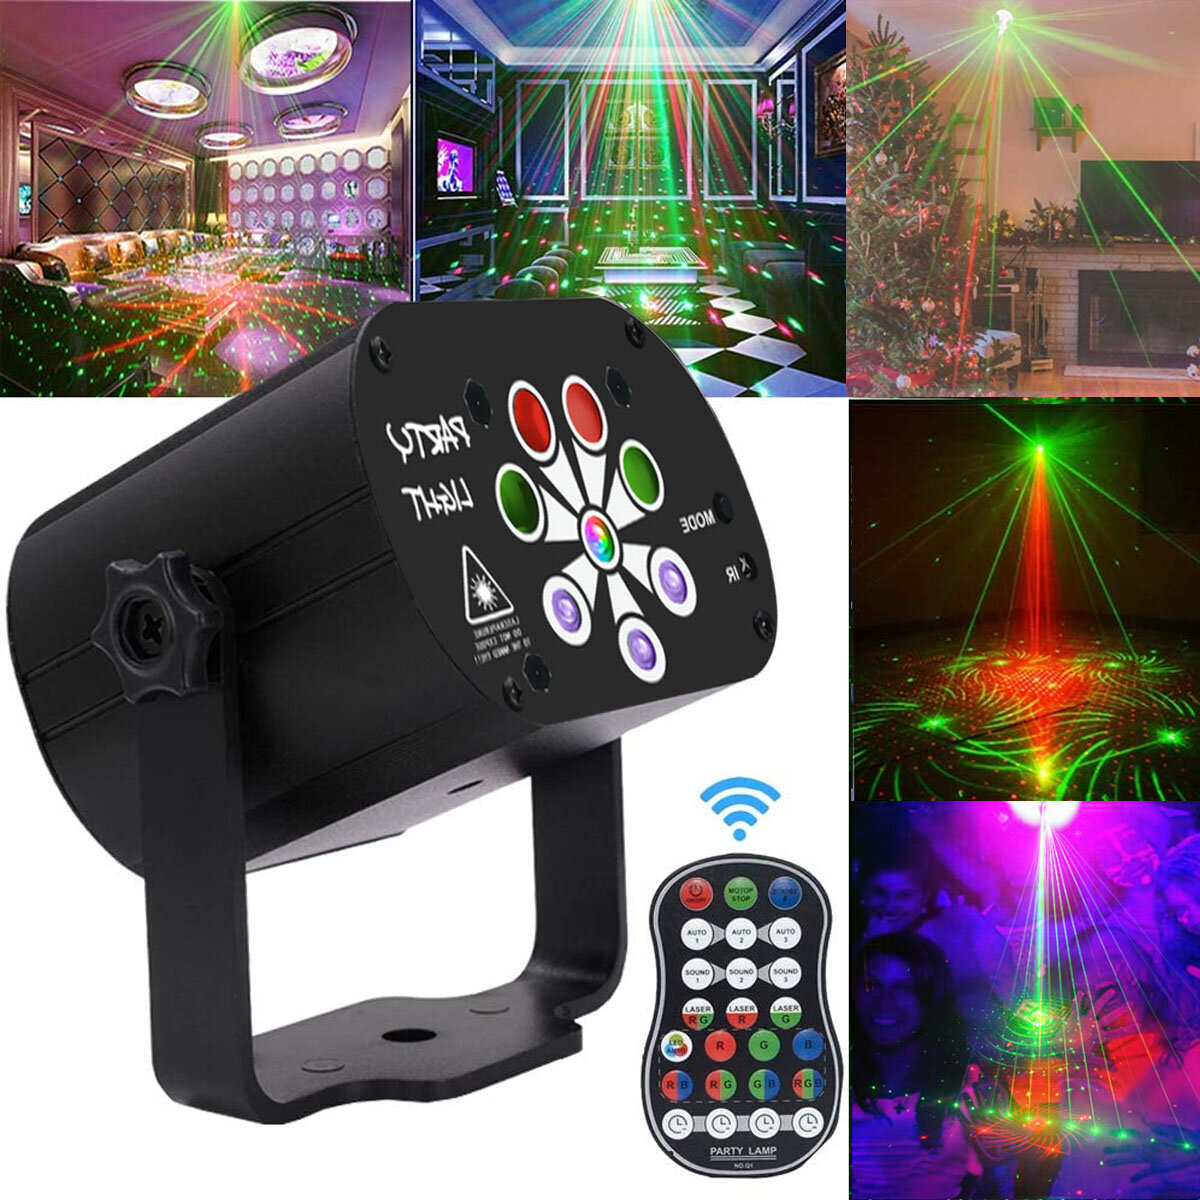 

8 Holes 120 Patterns USB LED Laser Light RGB Projector Stage Strobe Lamp DJ KTV Party Lighting with Remote Control